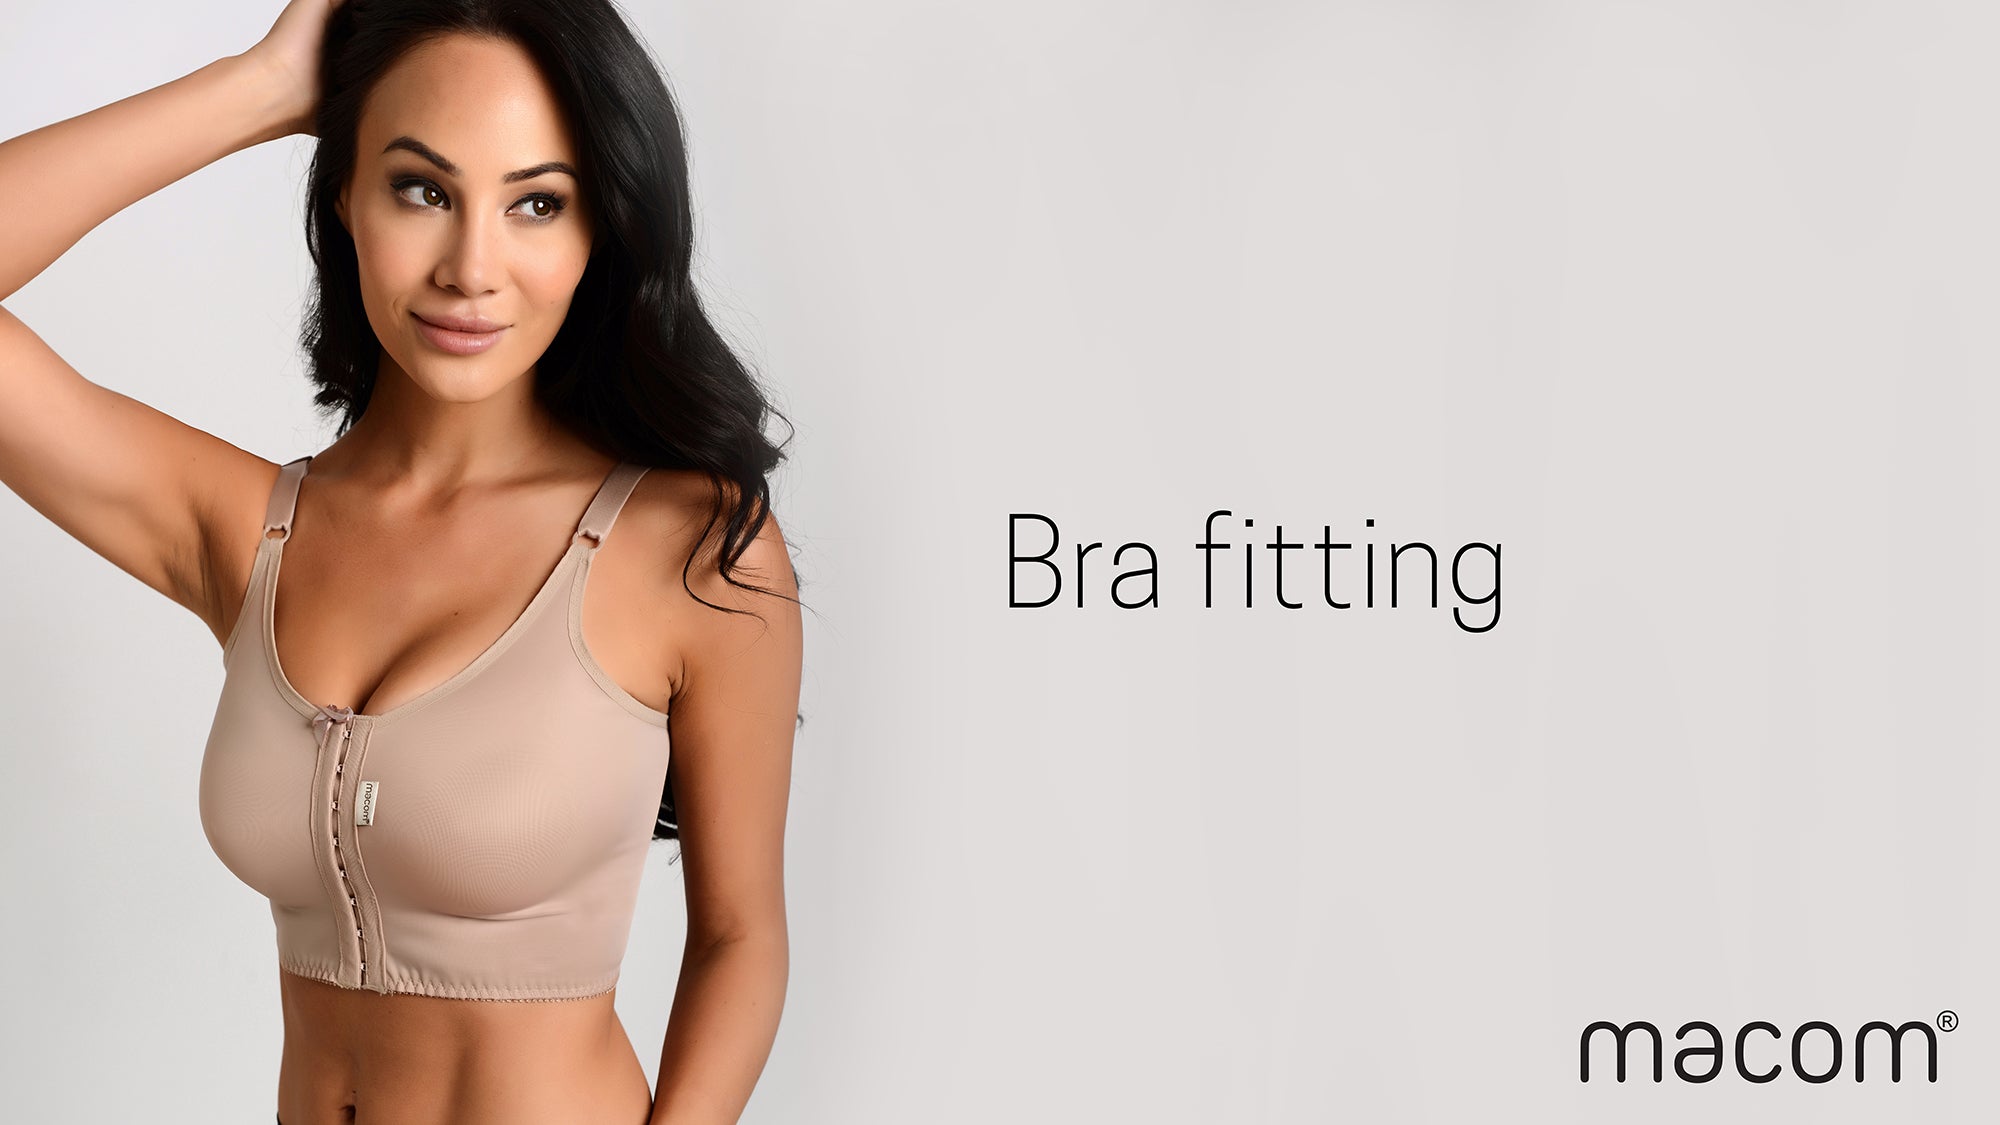 Shop our range of macom post surgery bras available on our website now